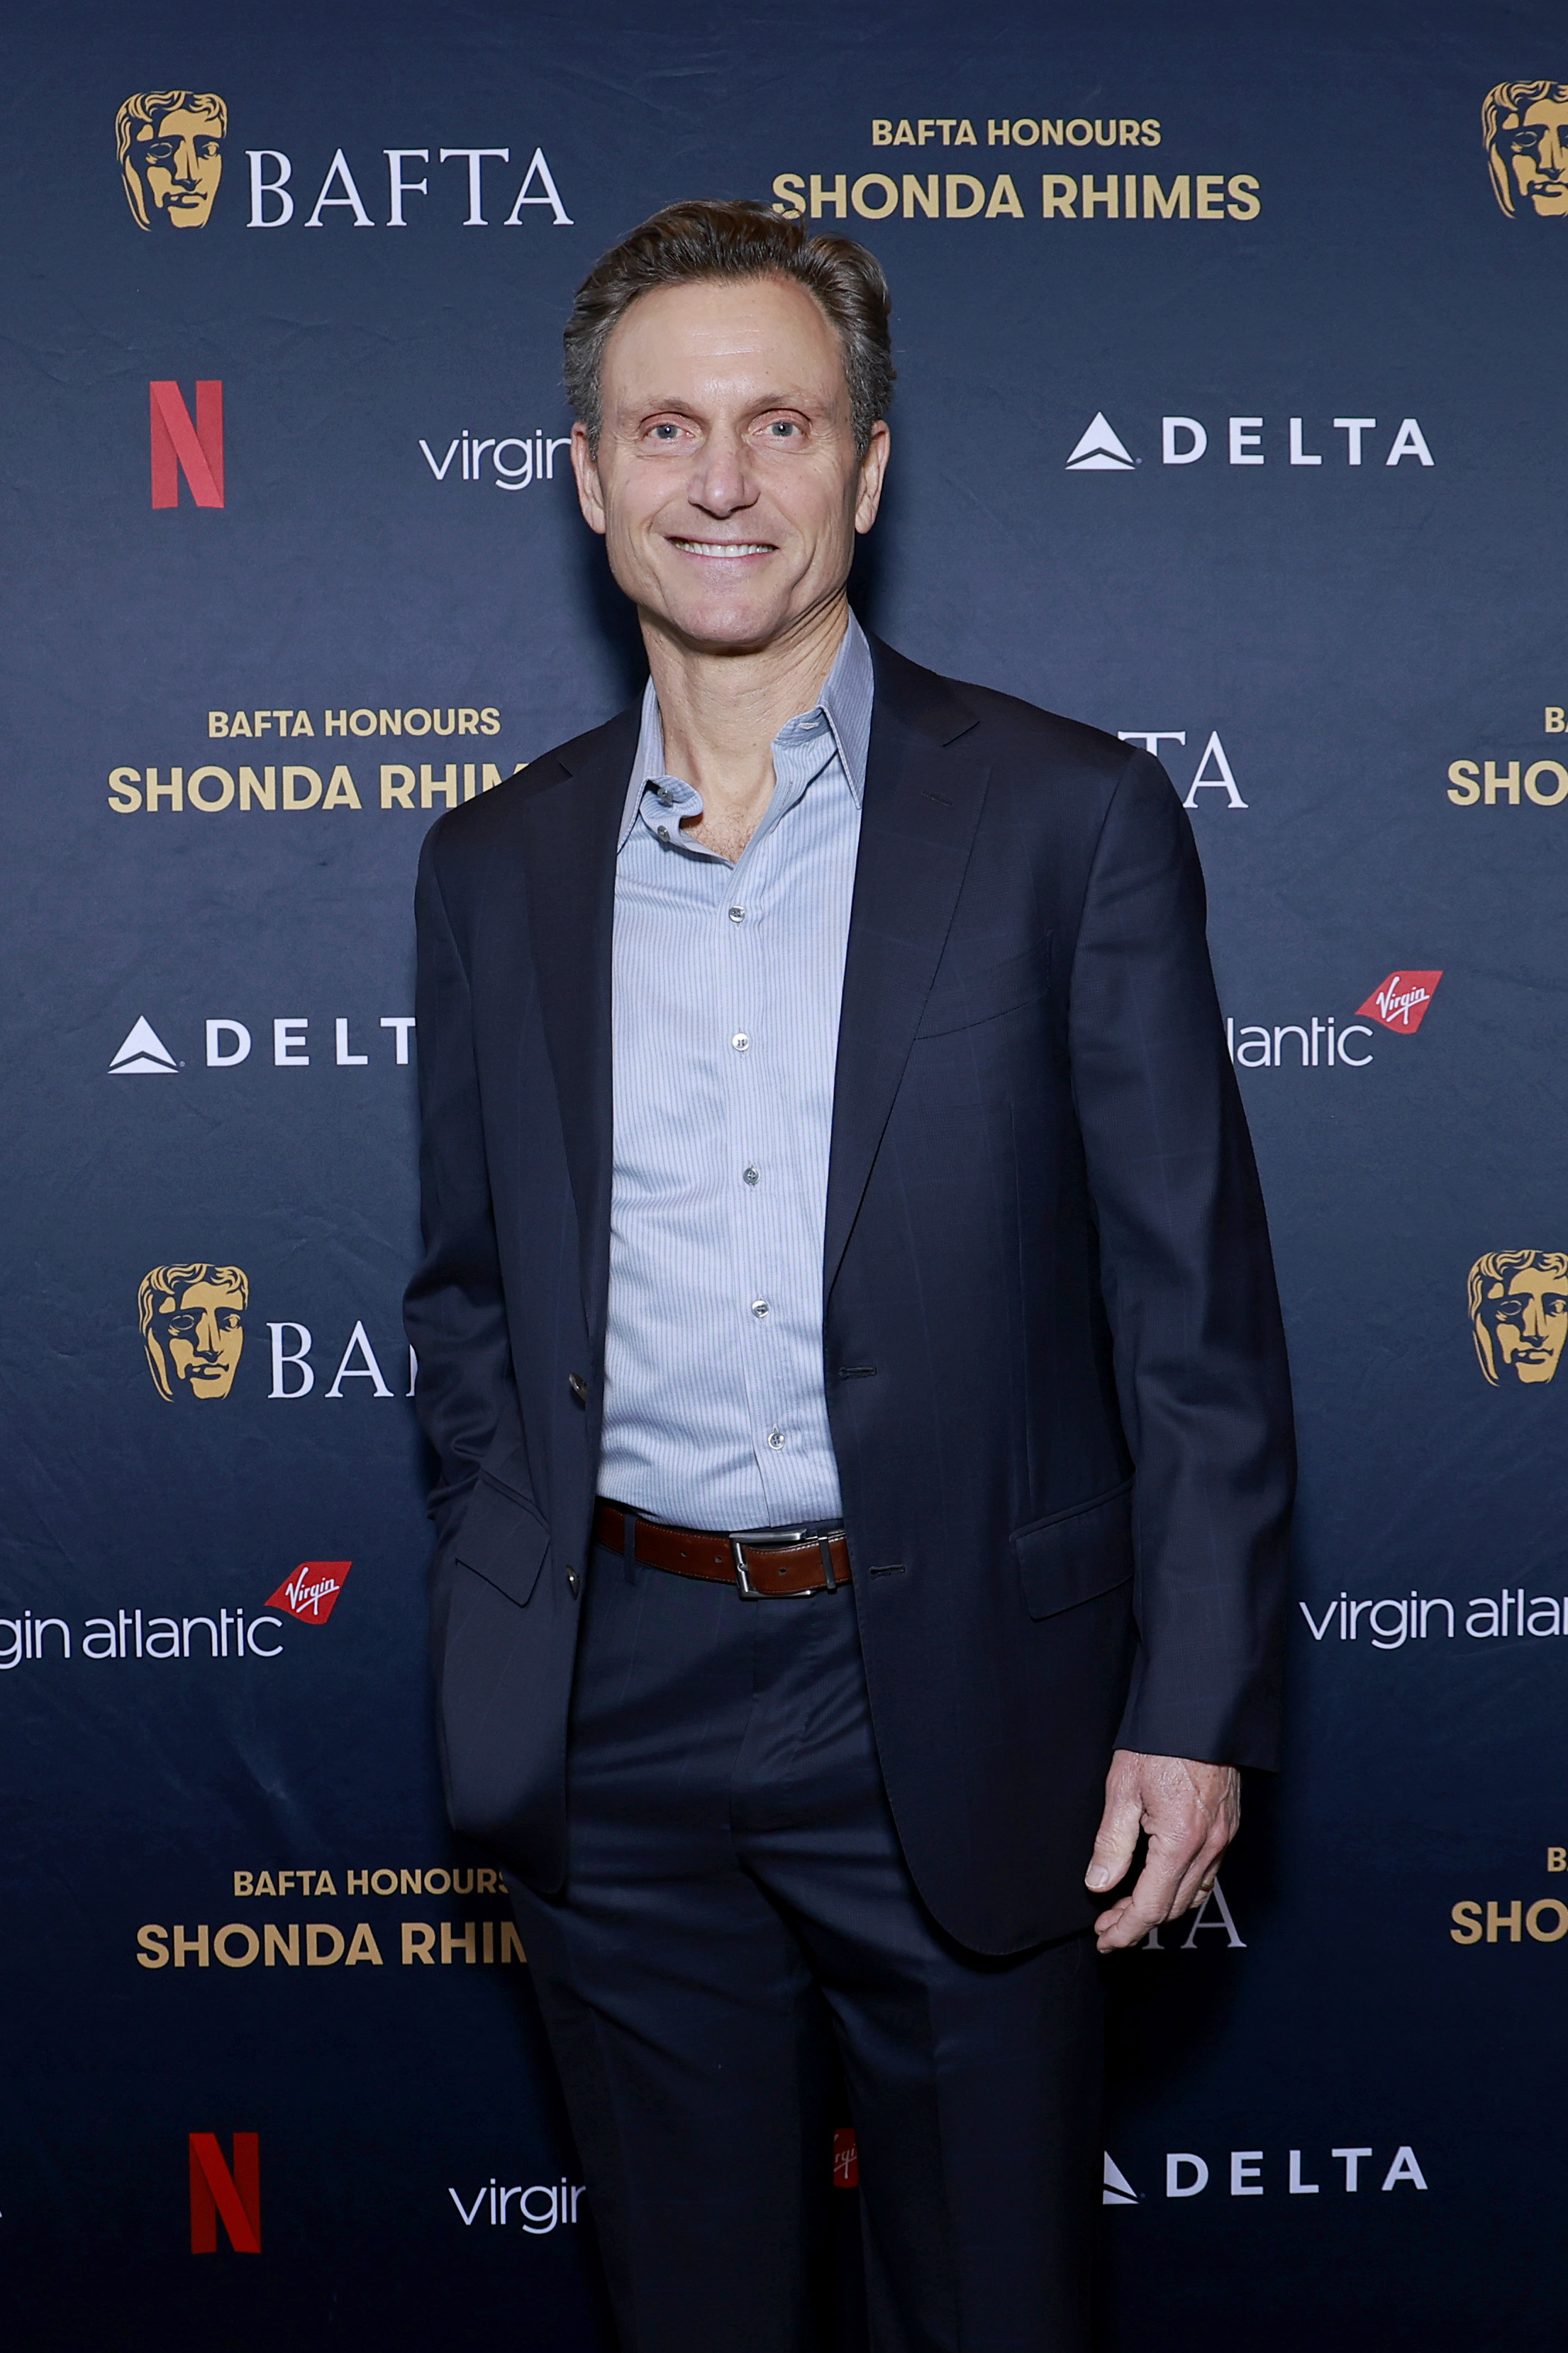 Tony Goldwyn in a suit and open-collar shirt posing at the BAFTA event